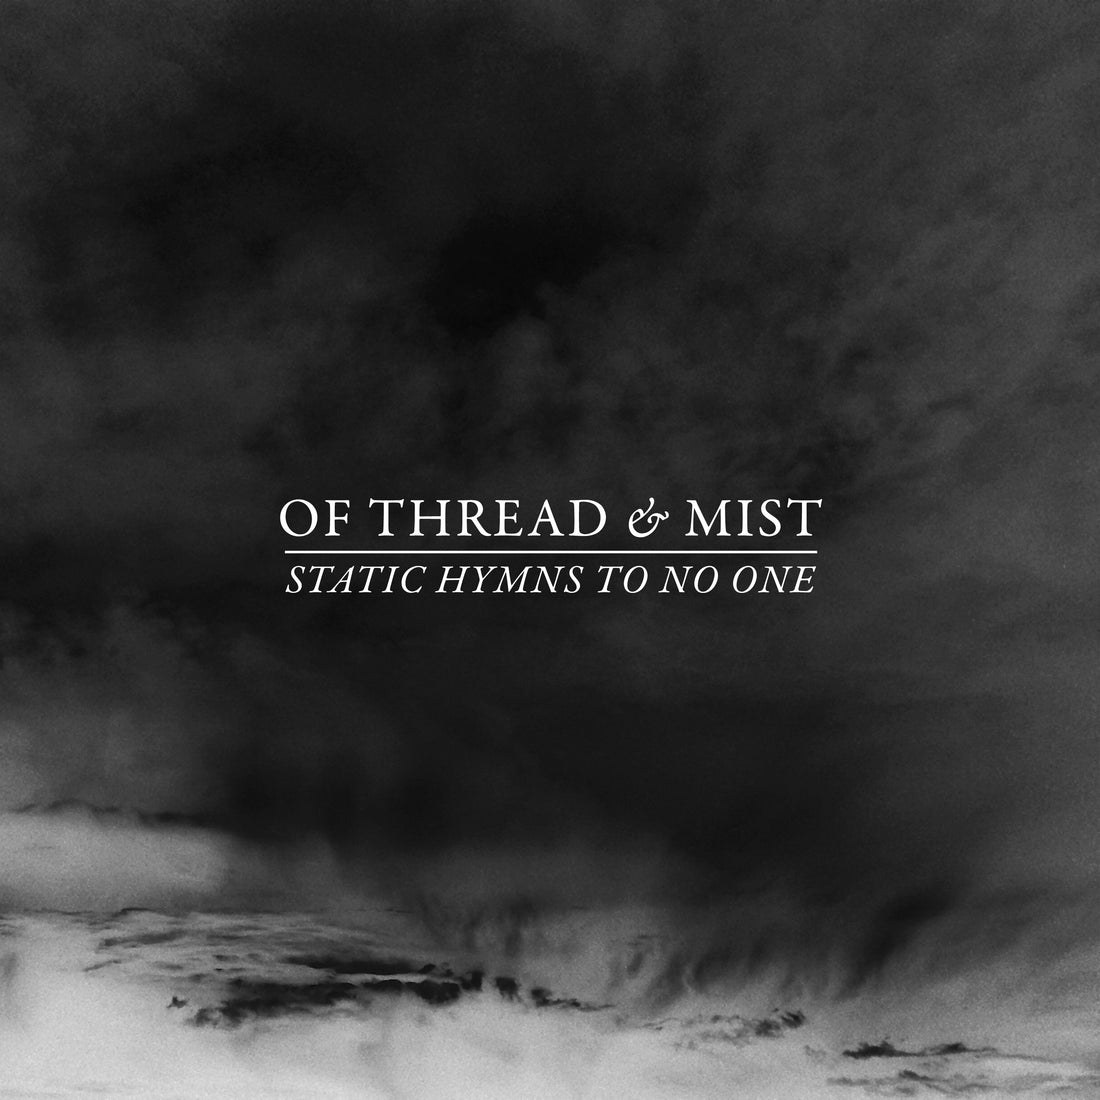 Of Thread & Mist - Static Hymns to No One